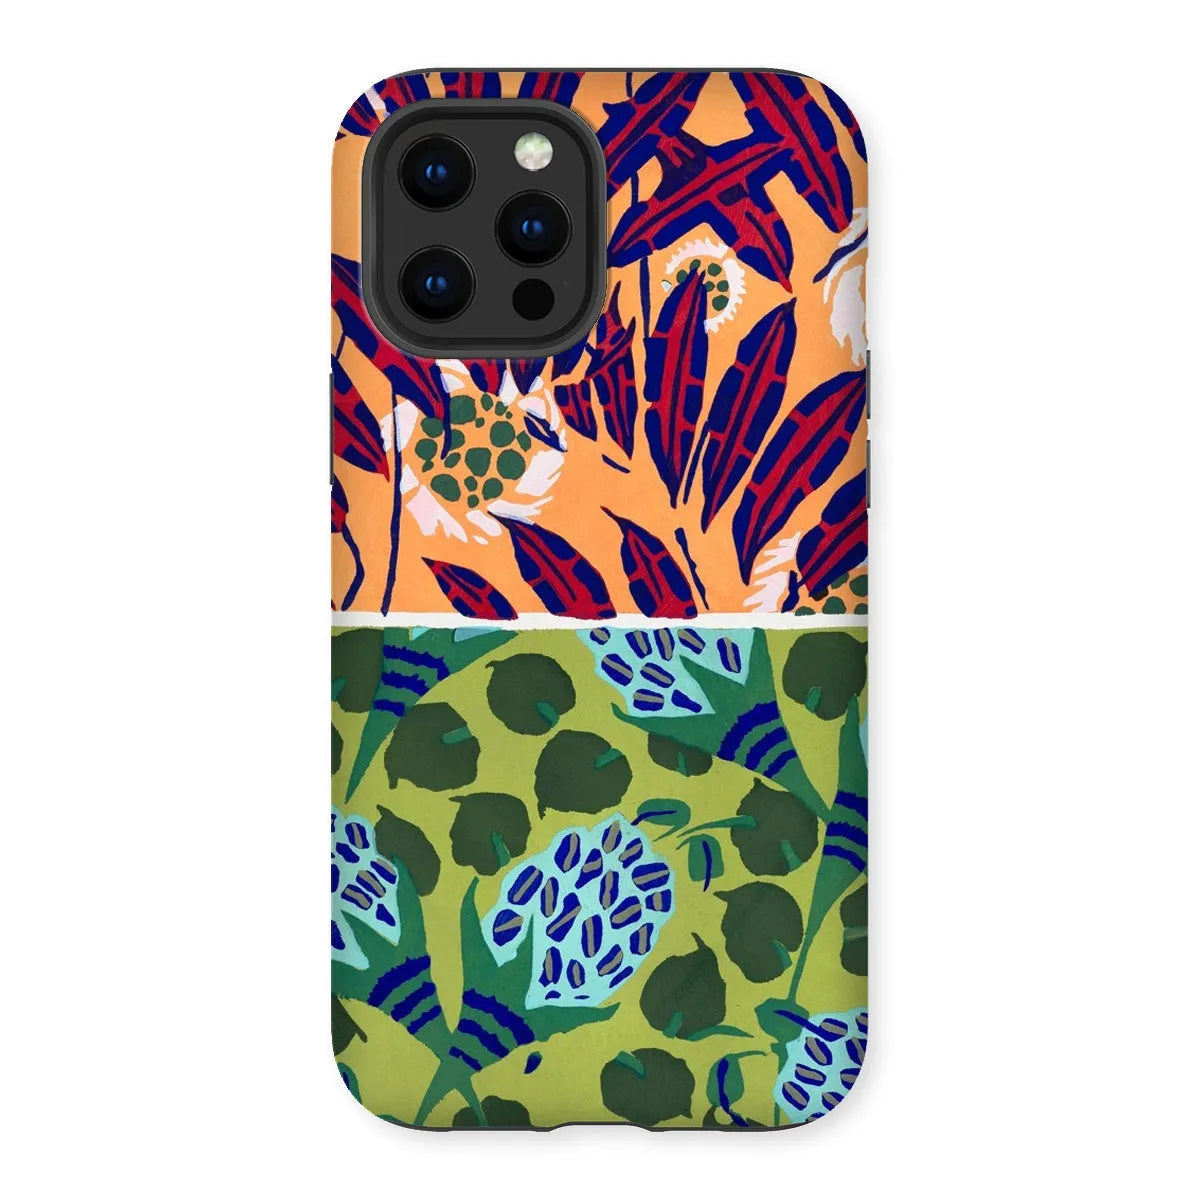 Fabric & Rugs Too - Pochoir Pattern Phone Case - E. A. Séguy - Iphone 12 Pro Max / Matte - Mobile Phone Cases